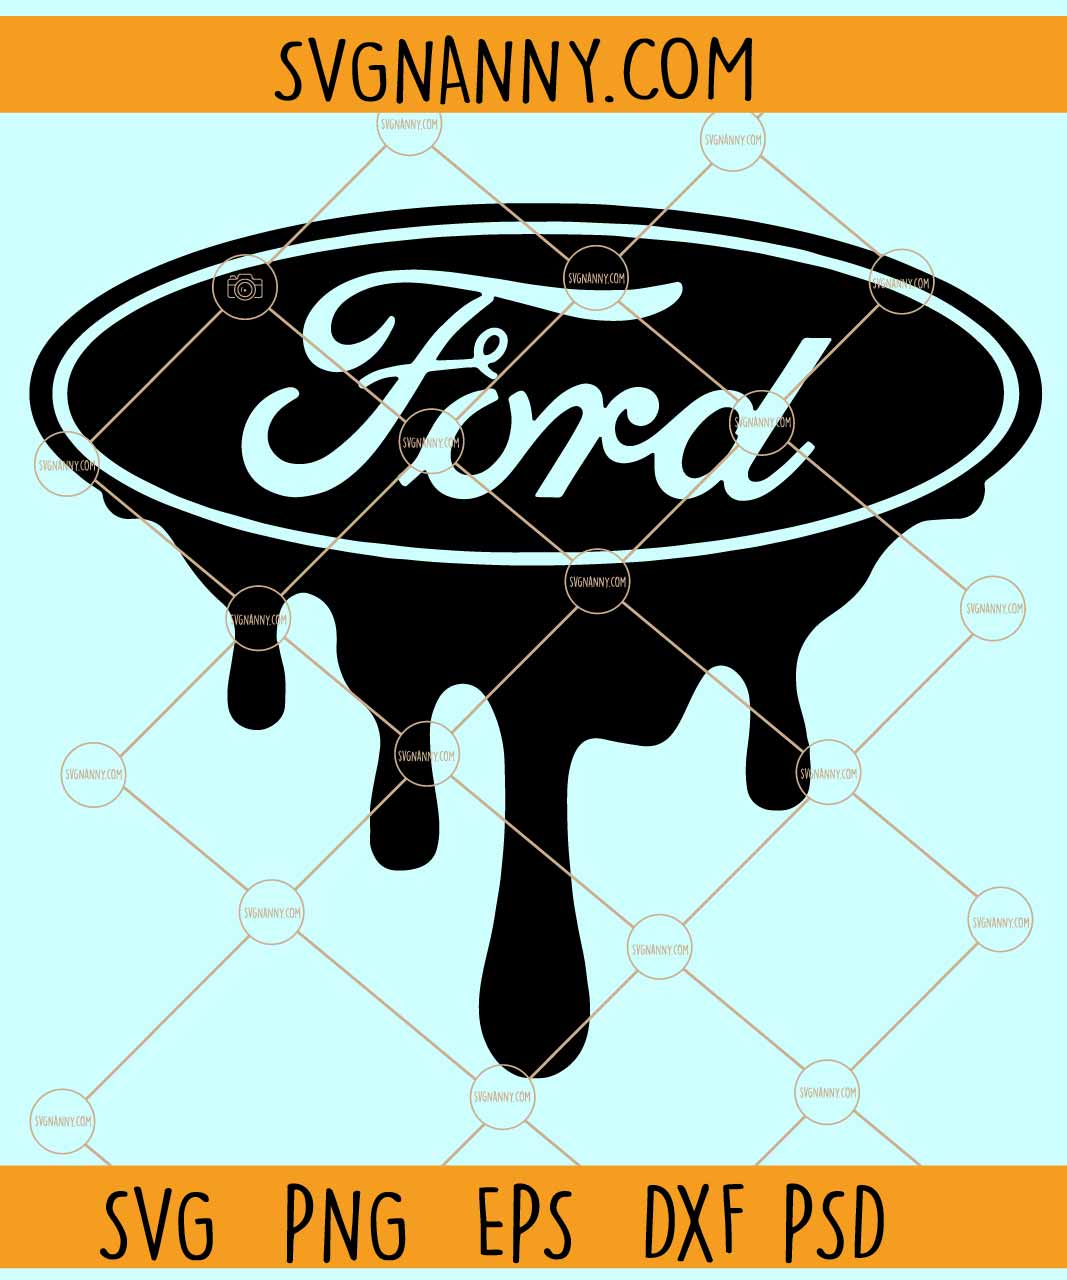 Ford Logo and symbol, meaning, history, PNG, brand